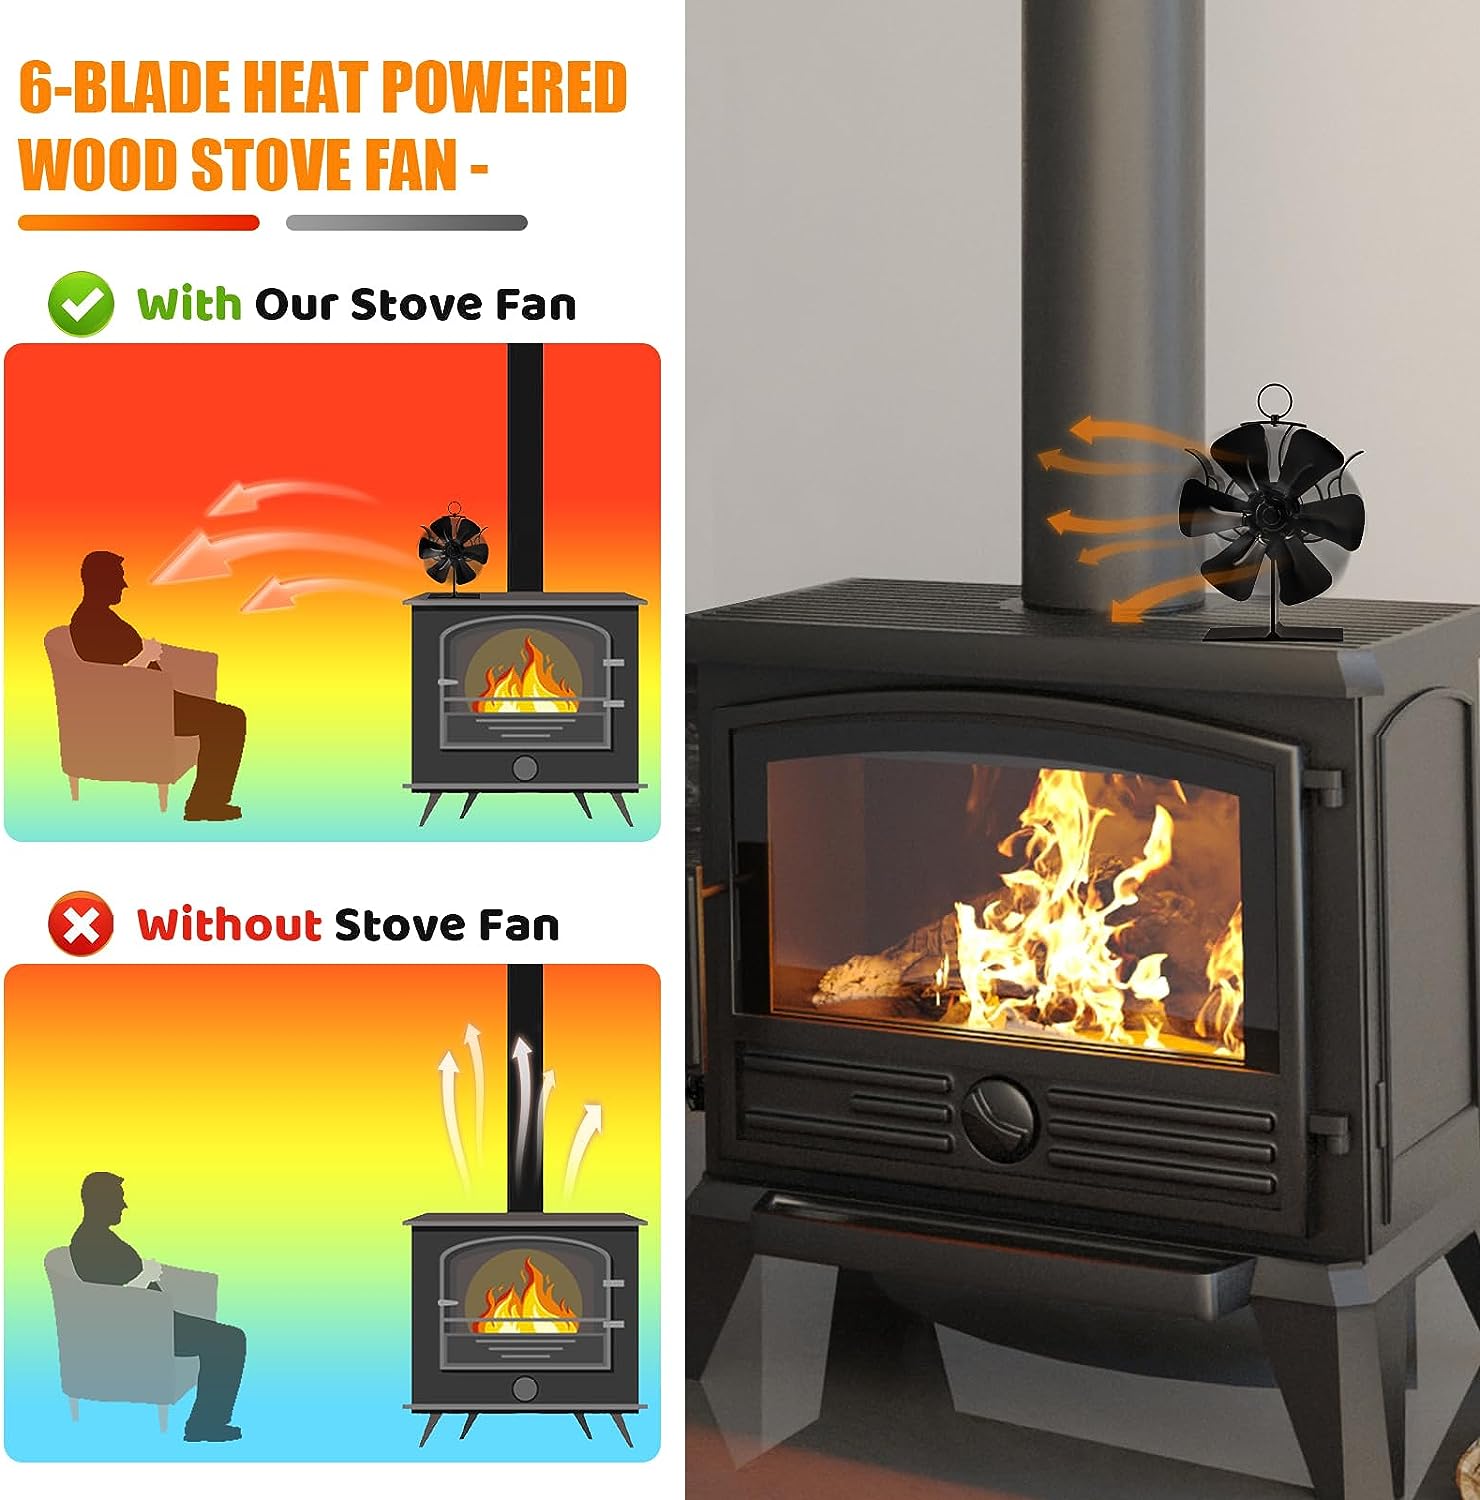 Wood Stove Fan Heat Powered for Wood Stove/Log Burner/Fireplace/ Heate –  GrillPartsReplacement - Online BBQ Parts Retailer